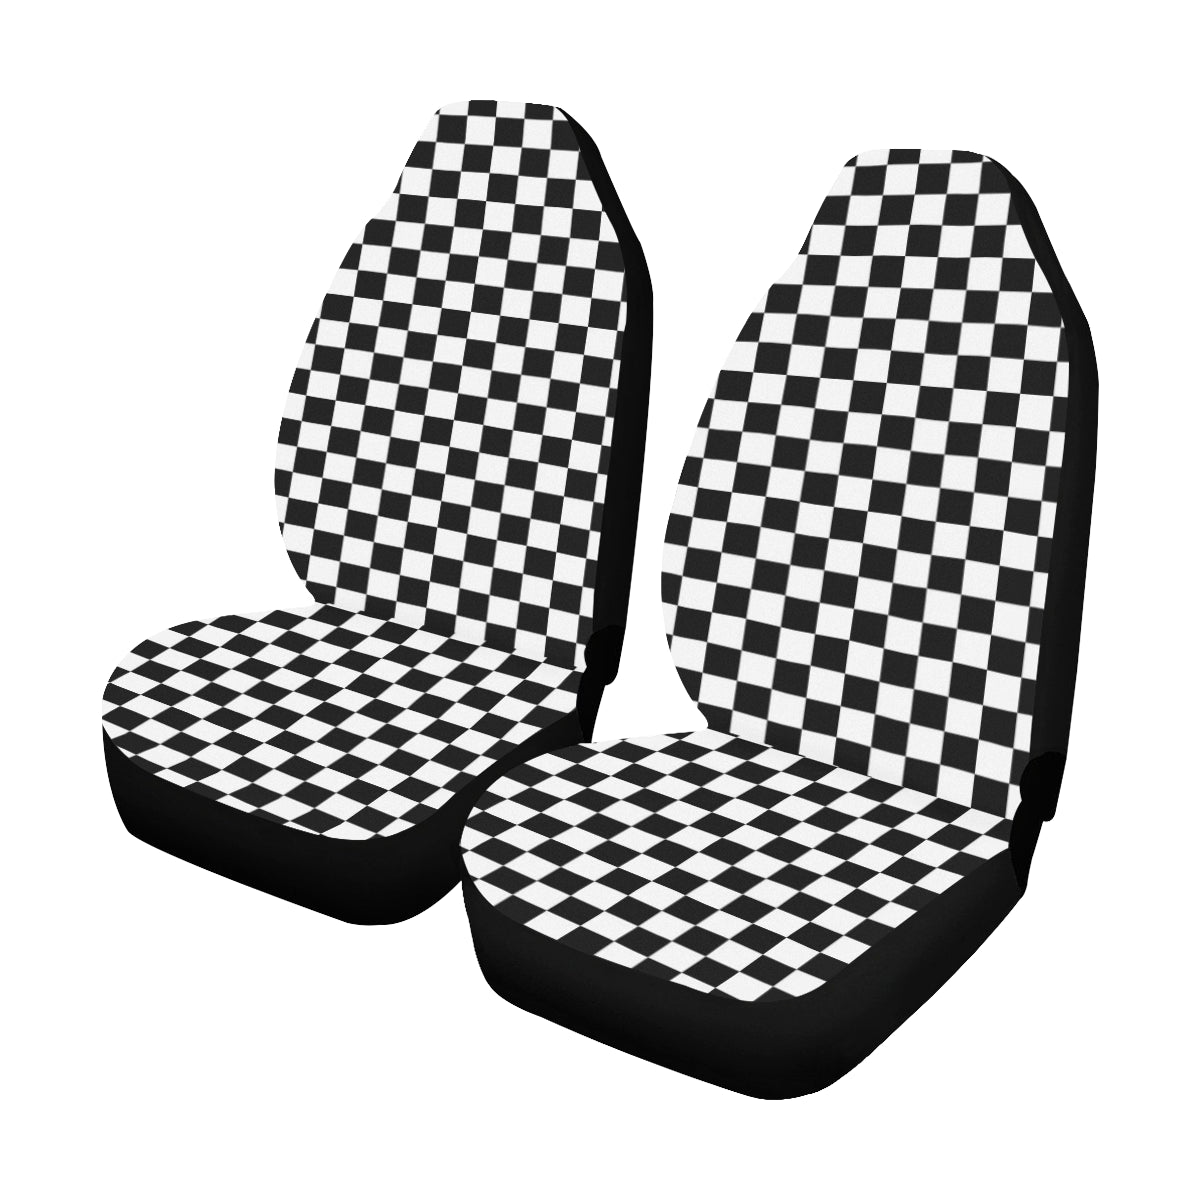 Checkered Flag Car Seat Covers 2 pc, Black White Check Buffalo Racing Pattern Front Seat Covers, Car SUV Seat Protector Accessory Starcove Fashion